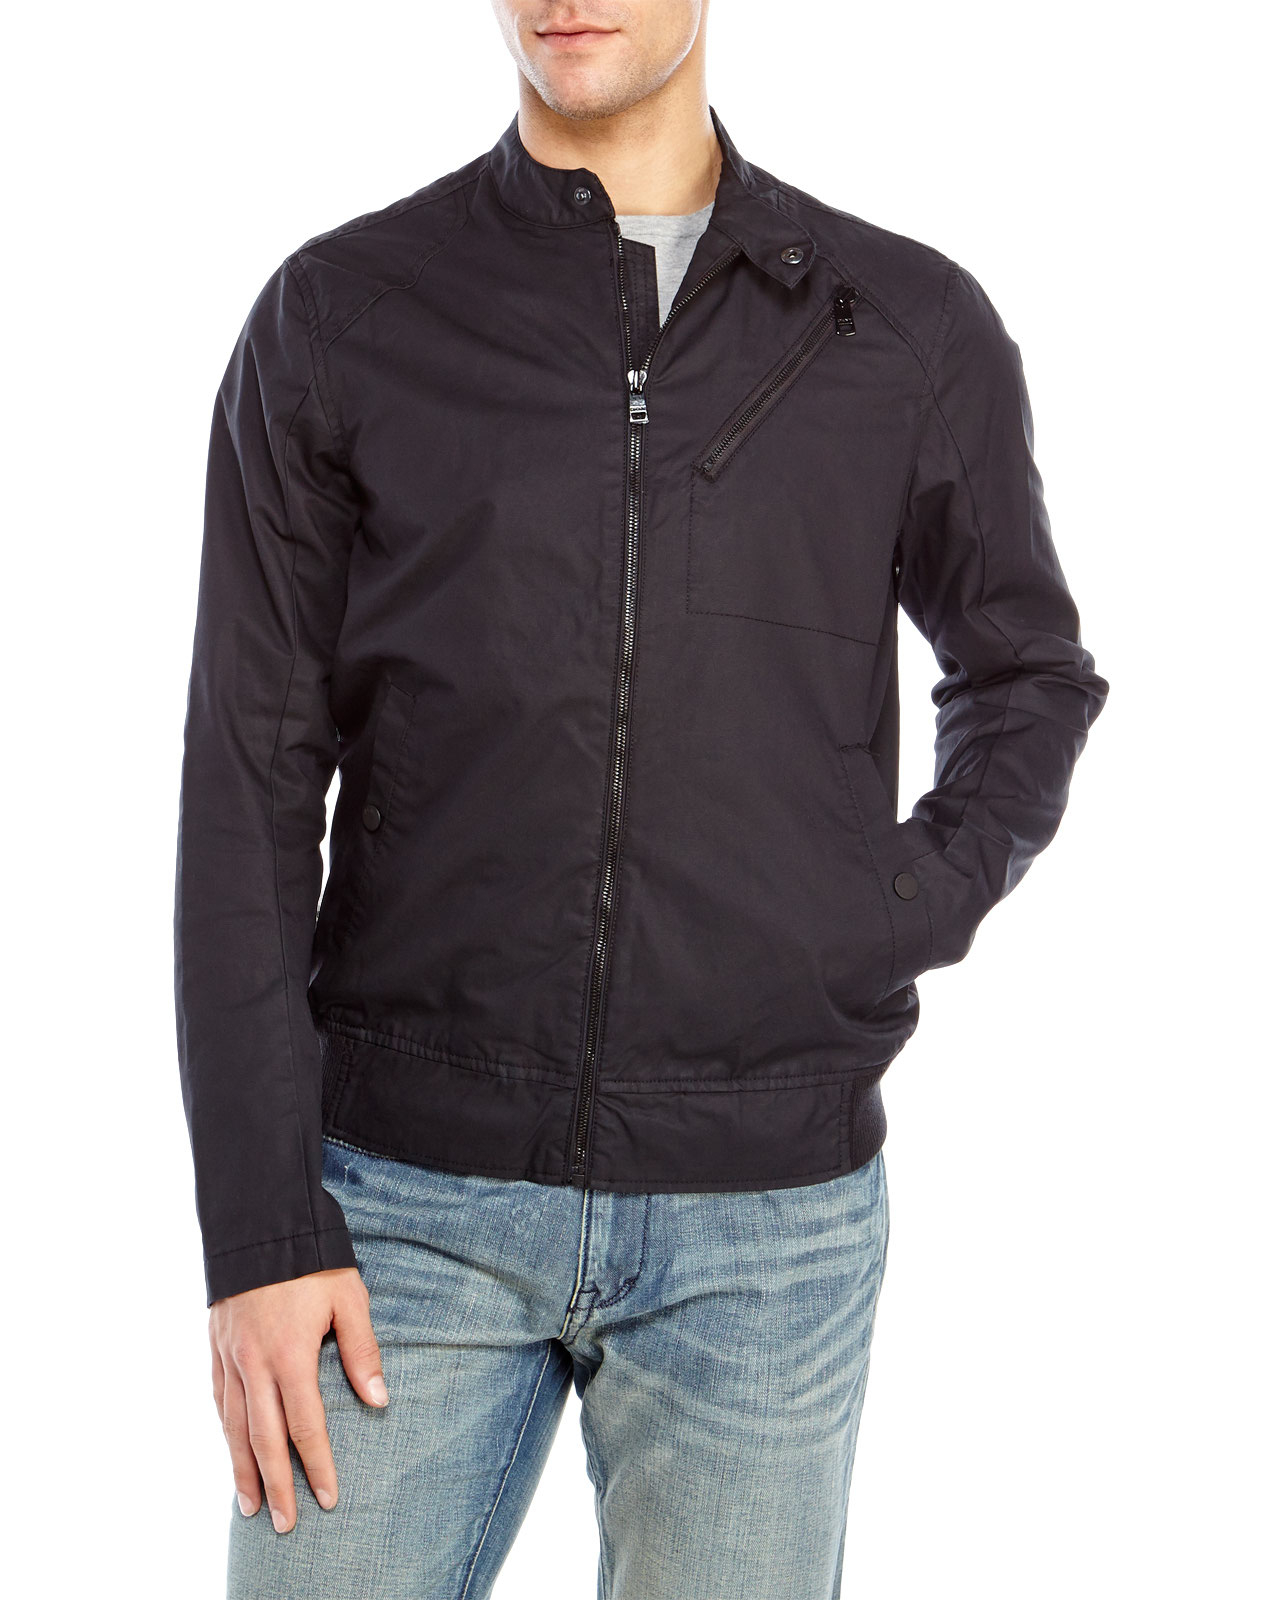 Lyst - Dkny Coated Cotton Bomber Jacket in Black for Men